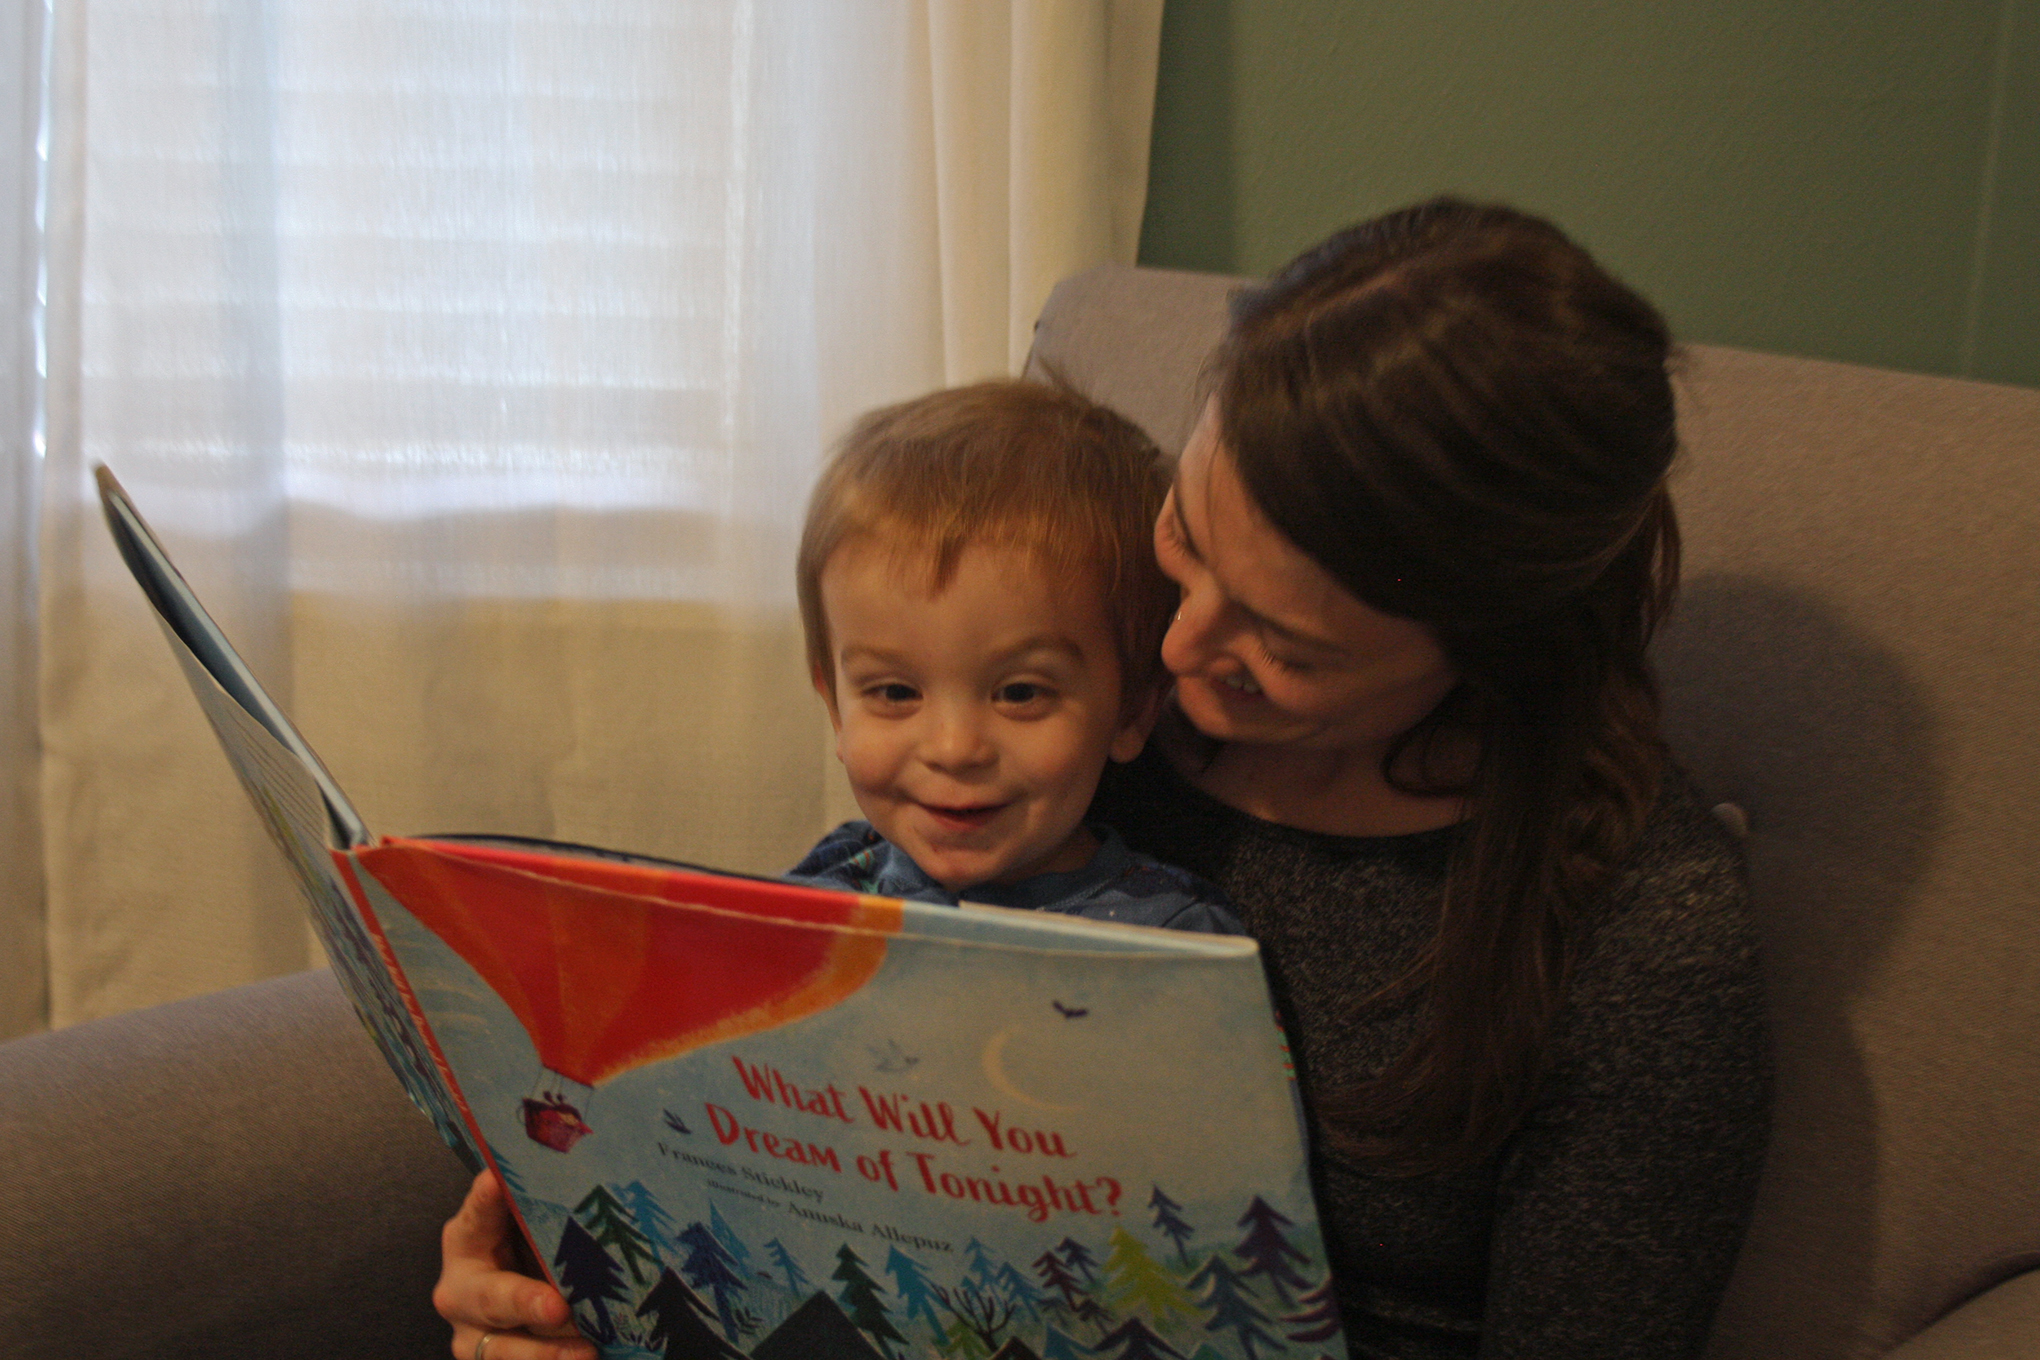 Motherhood: Reigniting a love for bedtime stories one book at a time